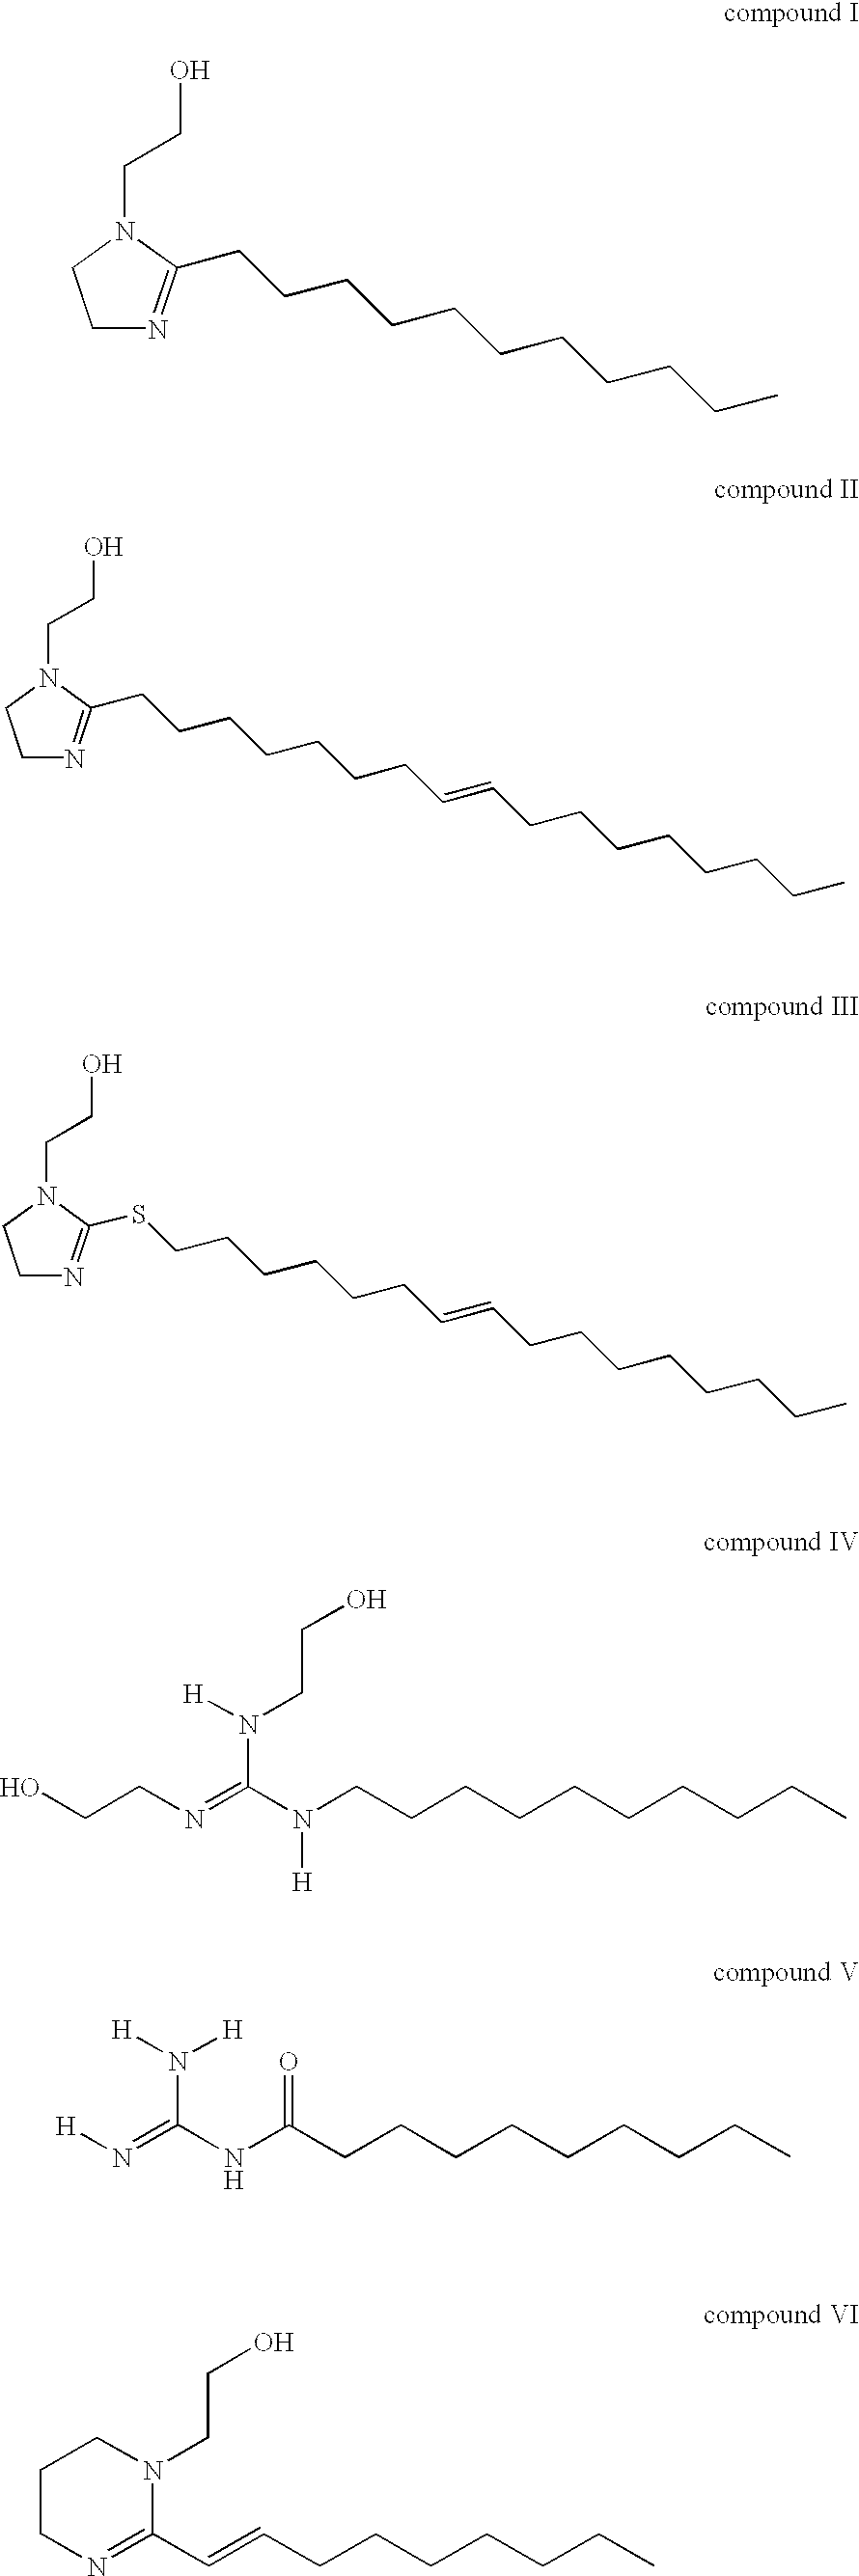 Preparation of lithographic printing plate by computer-to-plate by ink jet method utilizing amidine-containing oleophilizing compound